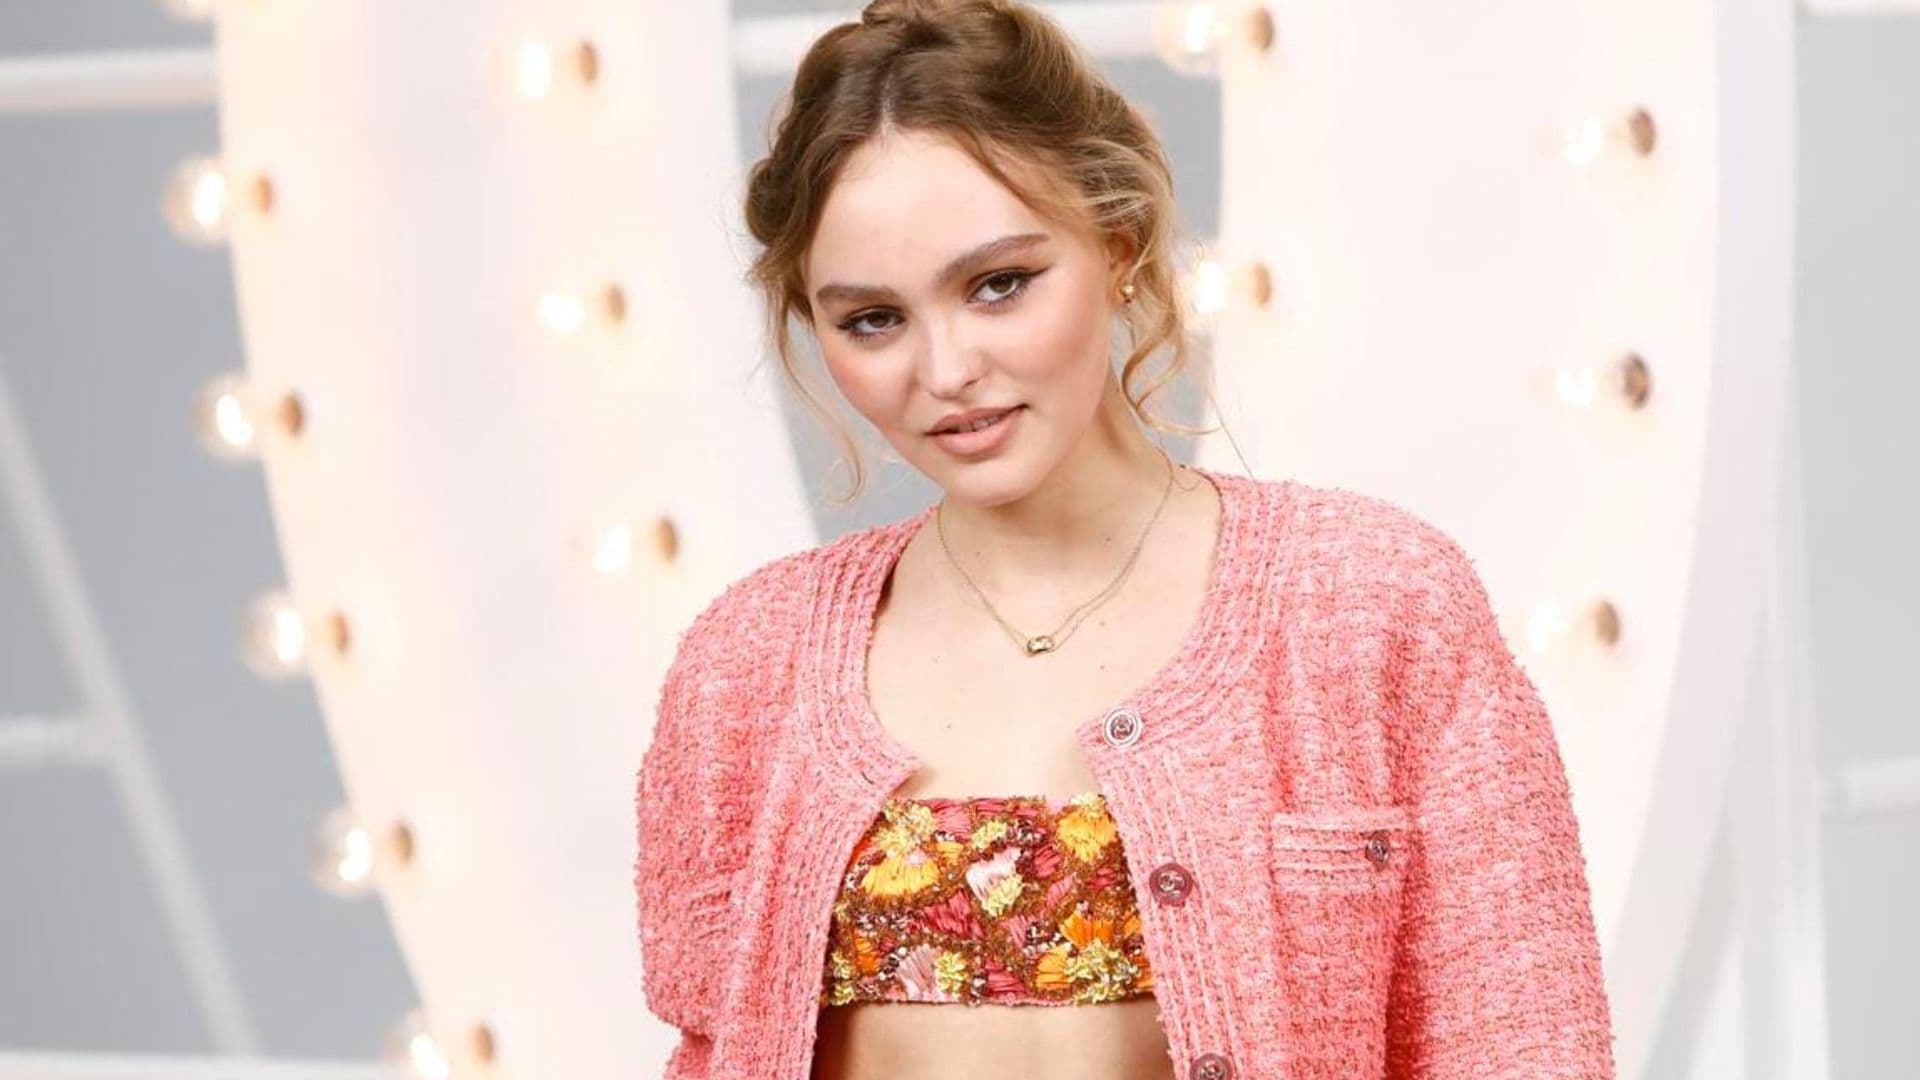 Johnny Depp’s daughter Lily Rose is best dressed at Chanel’s Fashion Week show